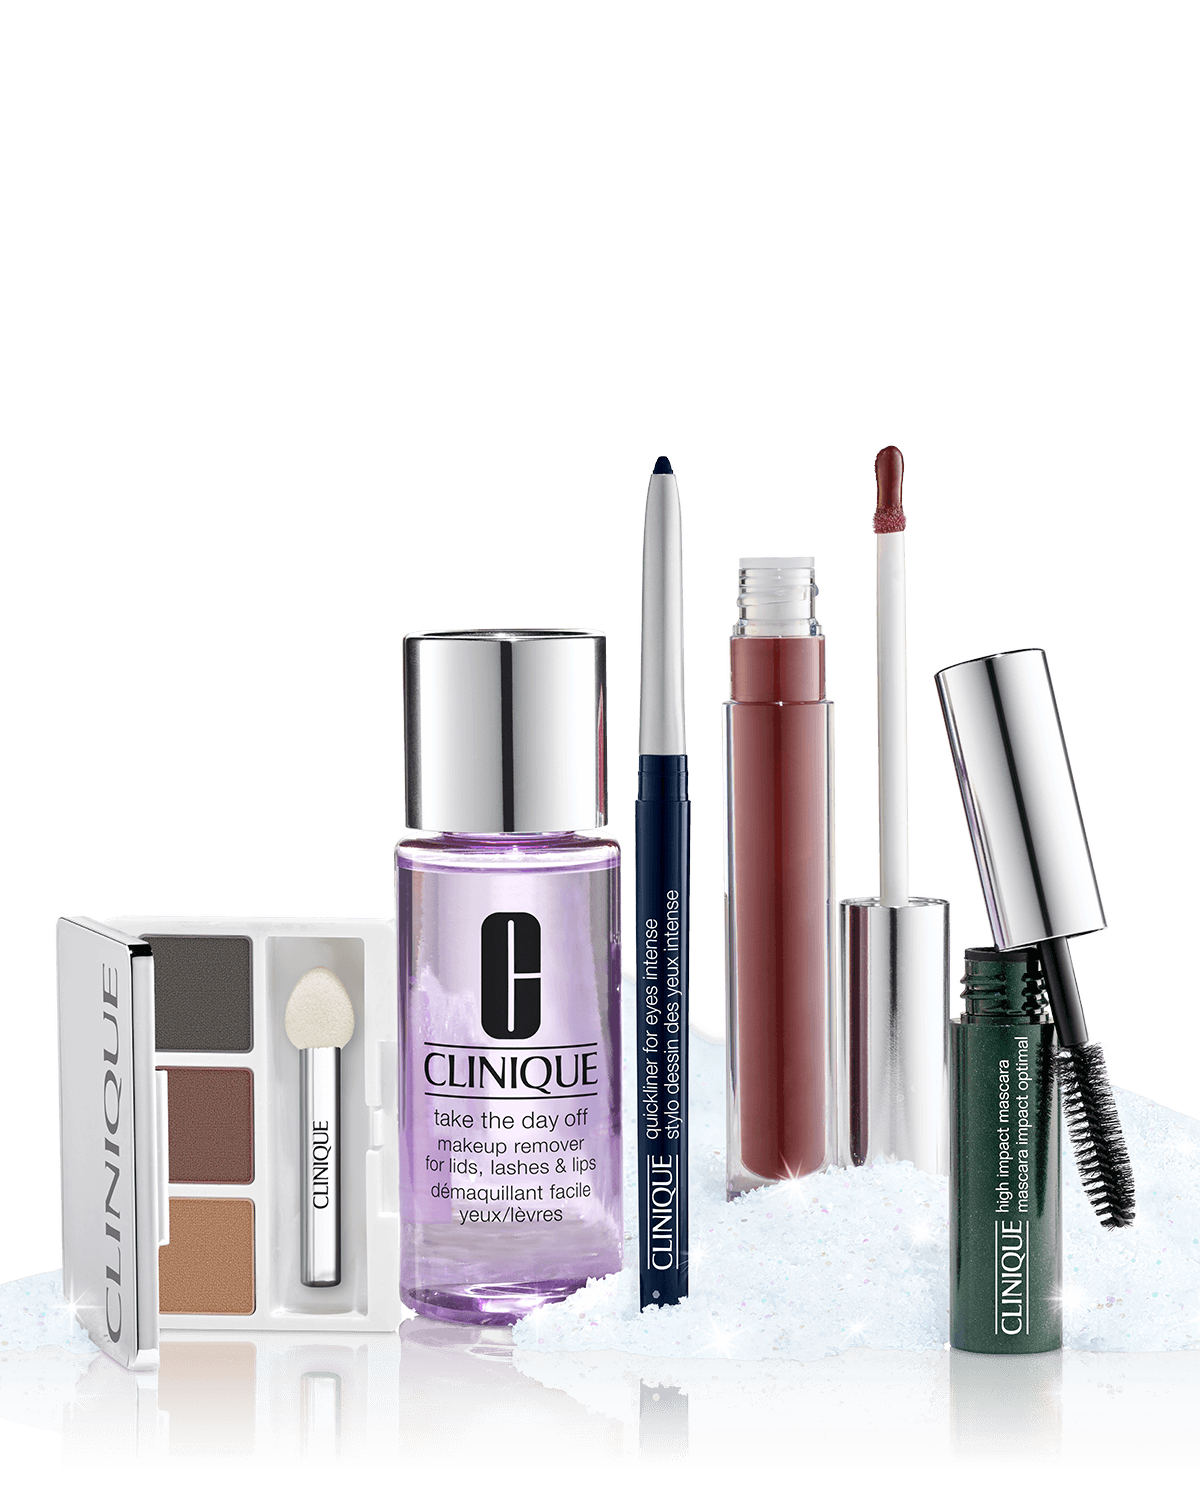 Full Face Forward: Not Your Average Neutrals Makeup Set, Everything you need for a festive holiday makeup look. A $102.00 value.